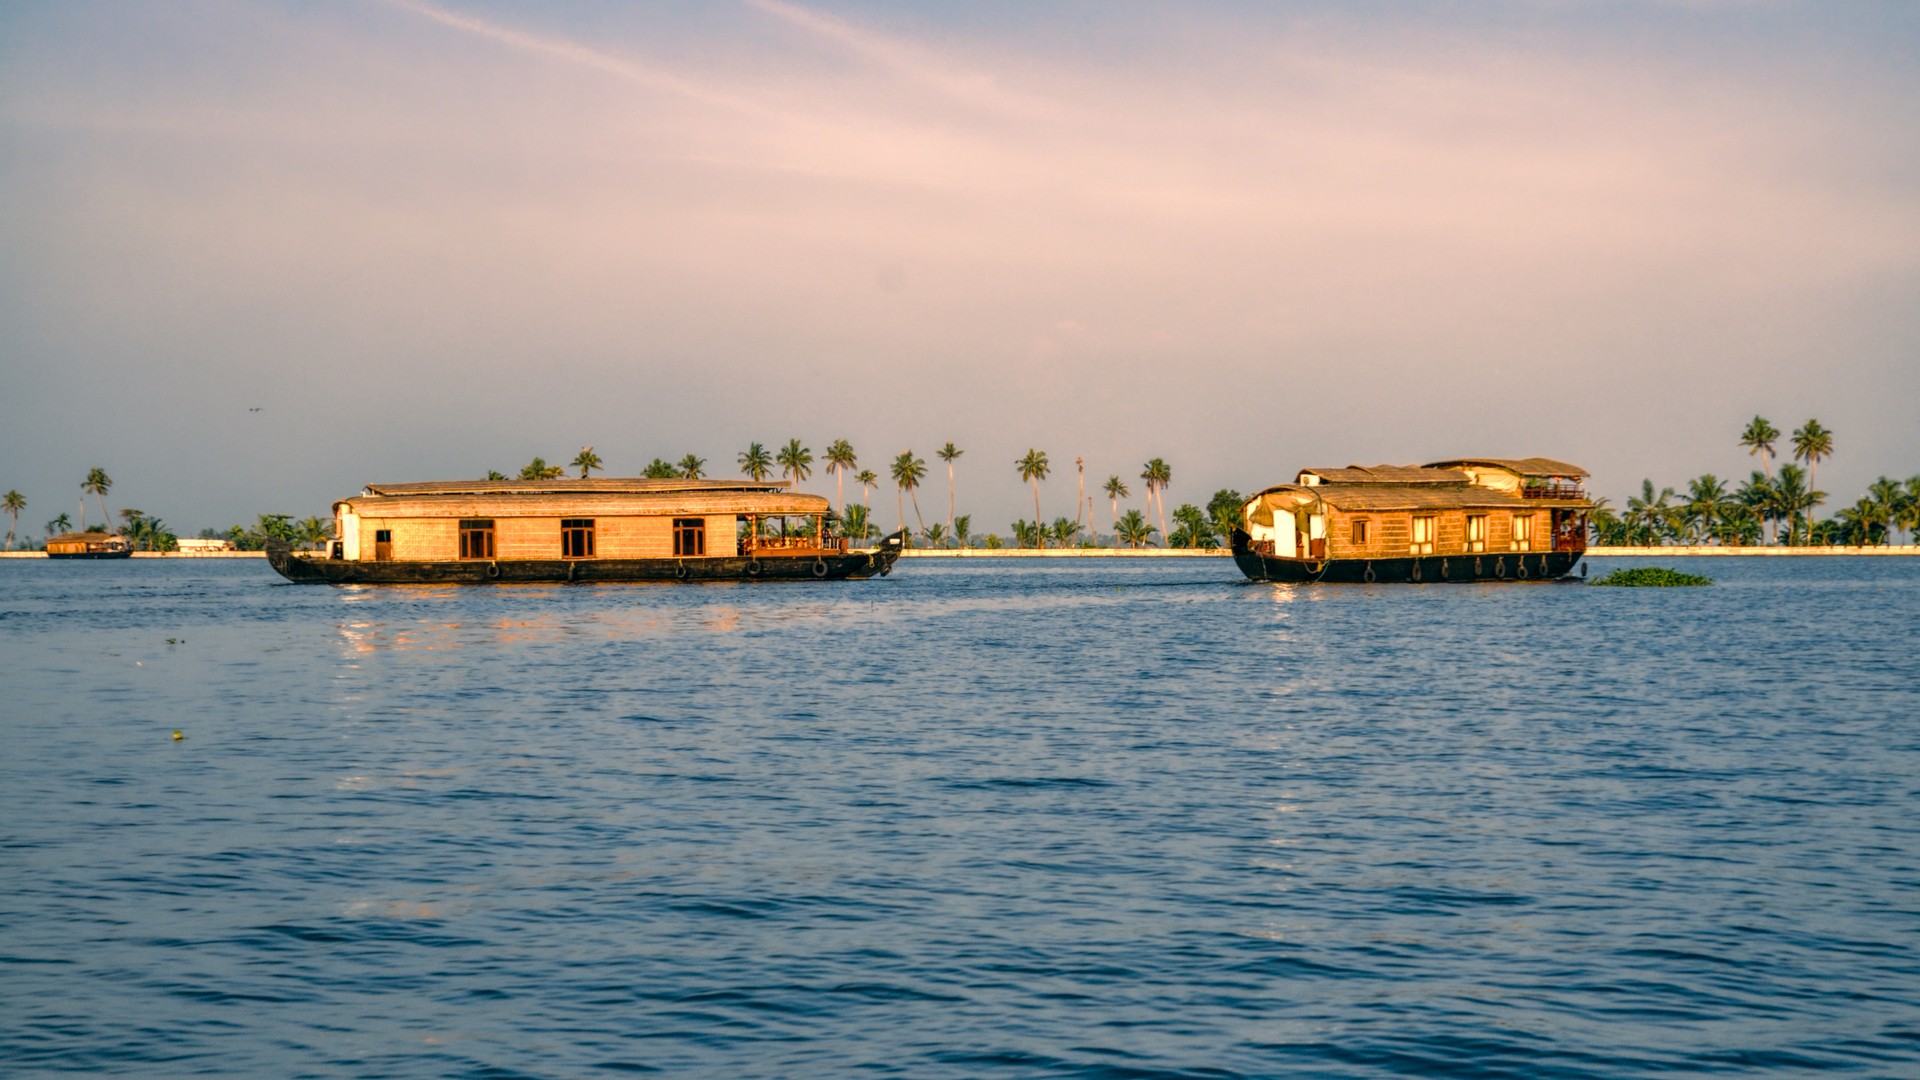 Alleppey Or Kumarakom: Which Is Best For A Kerala Houseboat Cruise?